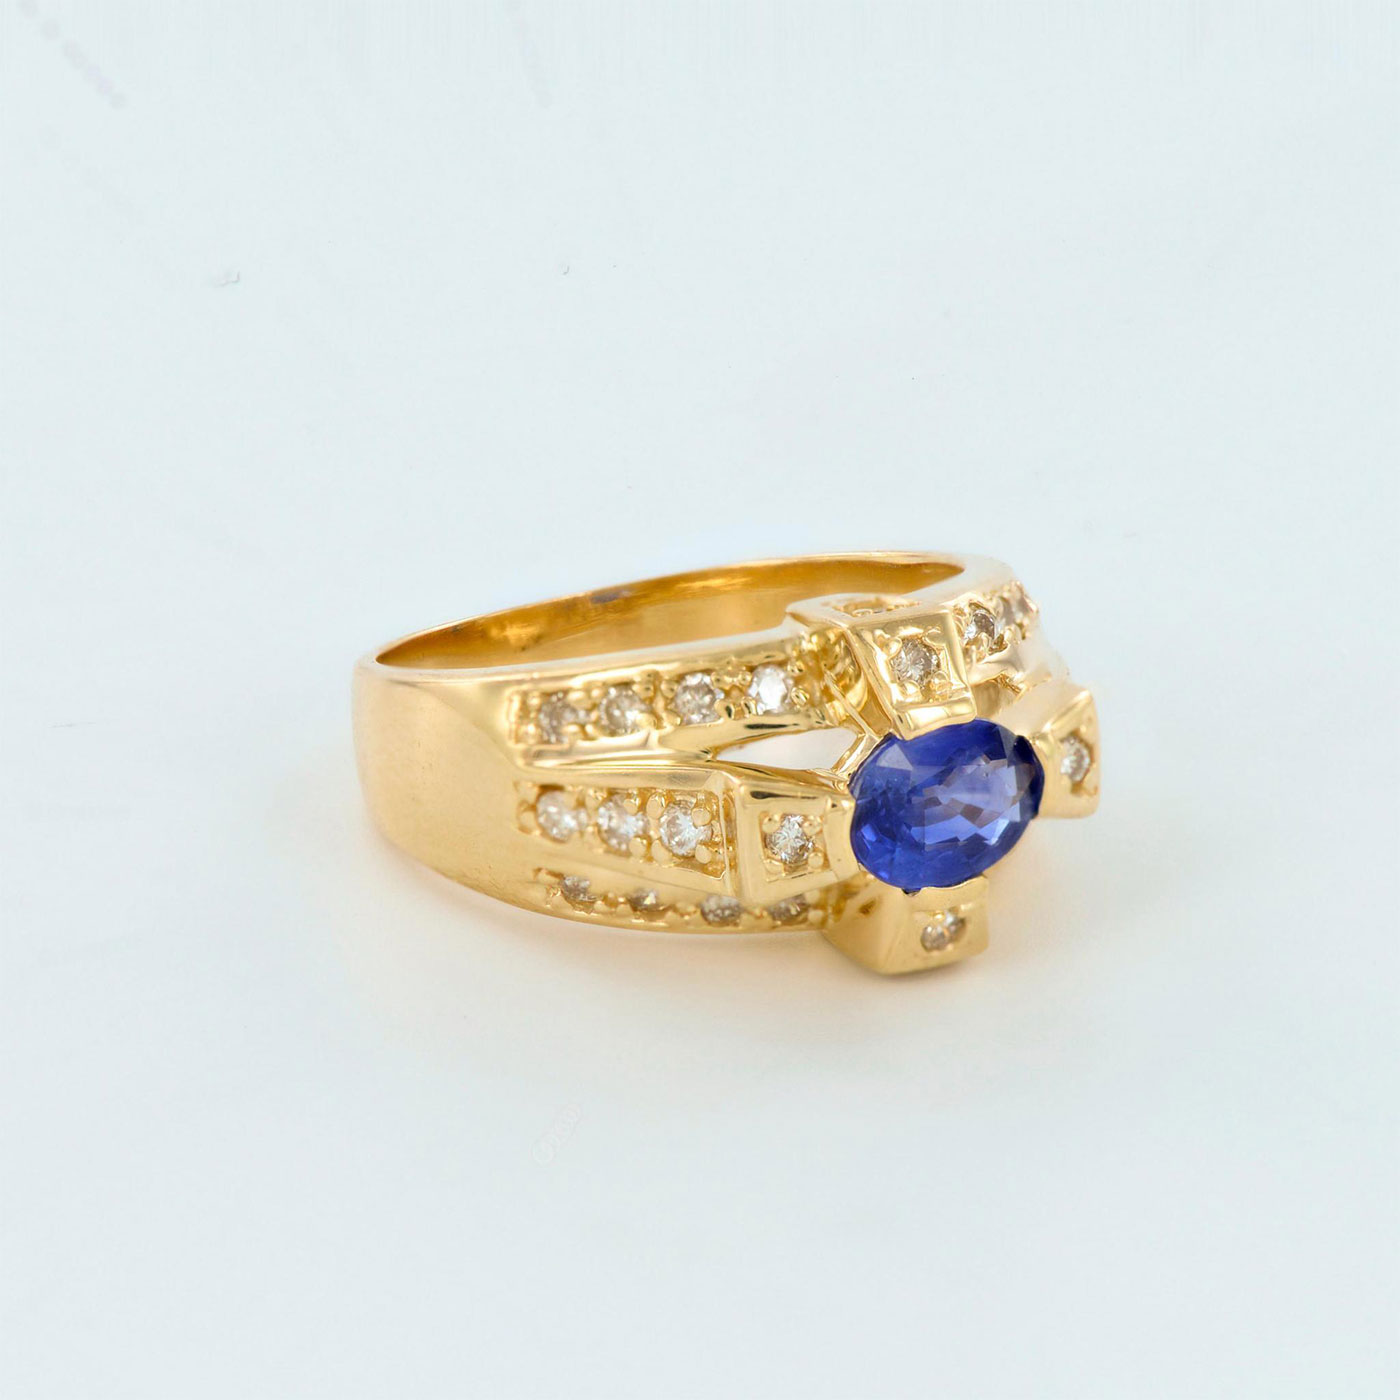 14K Yellow Gold Diamonds and Blue Sapphire Statement Ring - Image 4 of 5